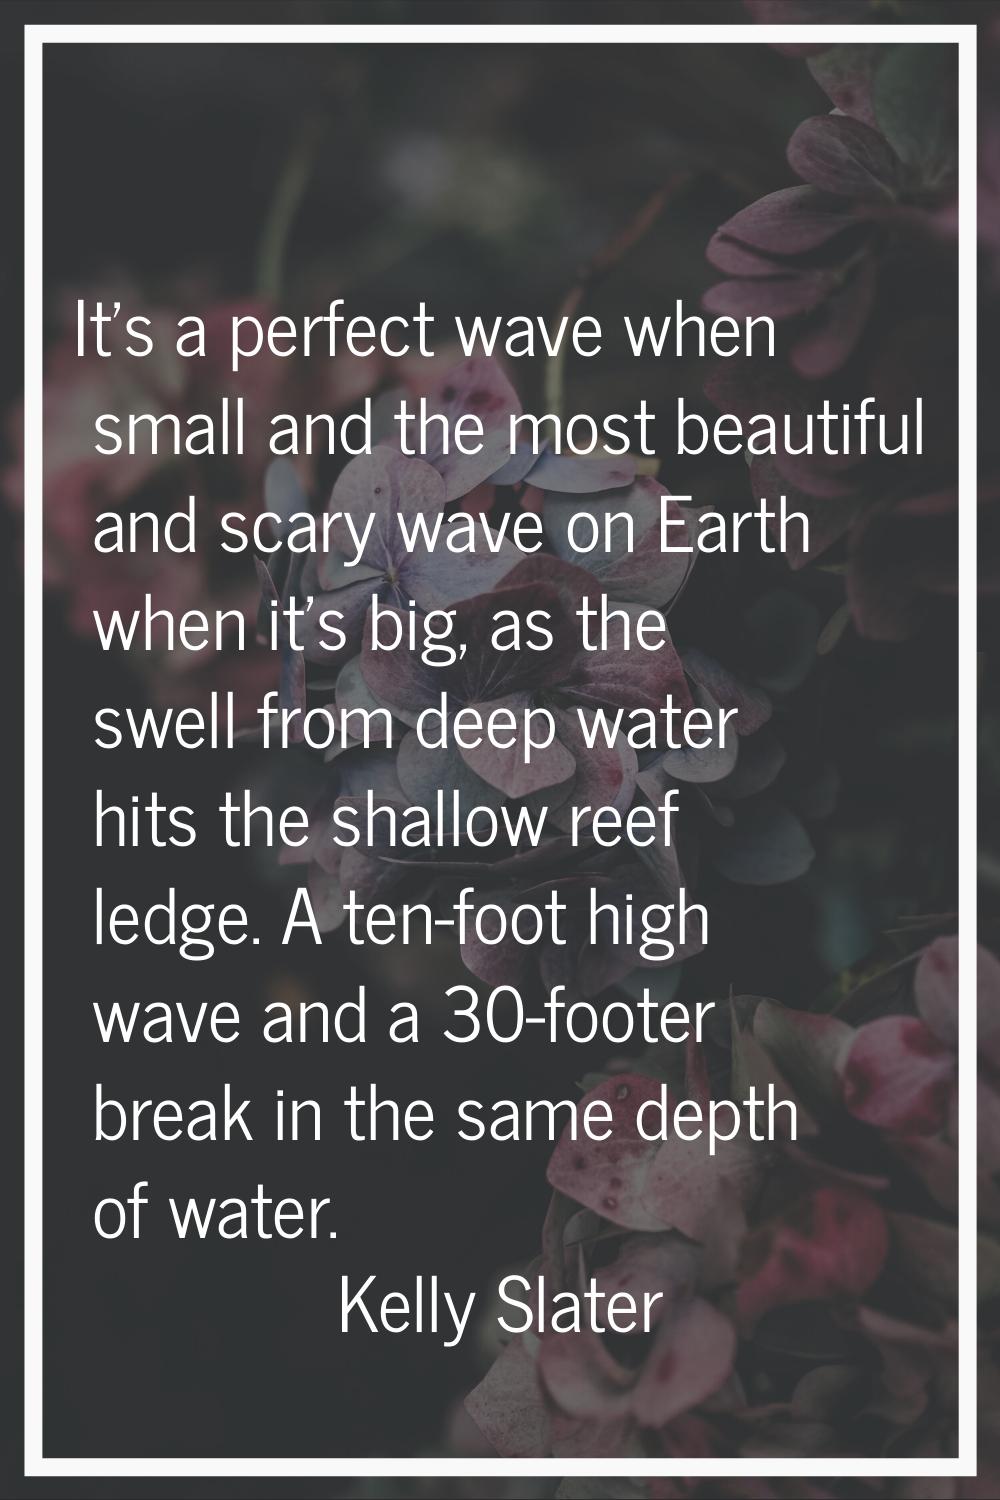 It's a perfect wave when small and the most beautiful and scary wave on Earth when it's big, as the